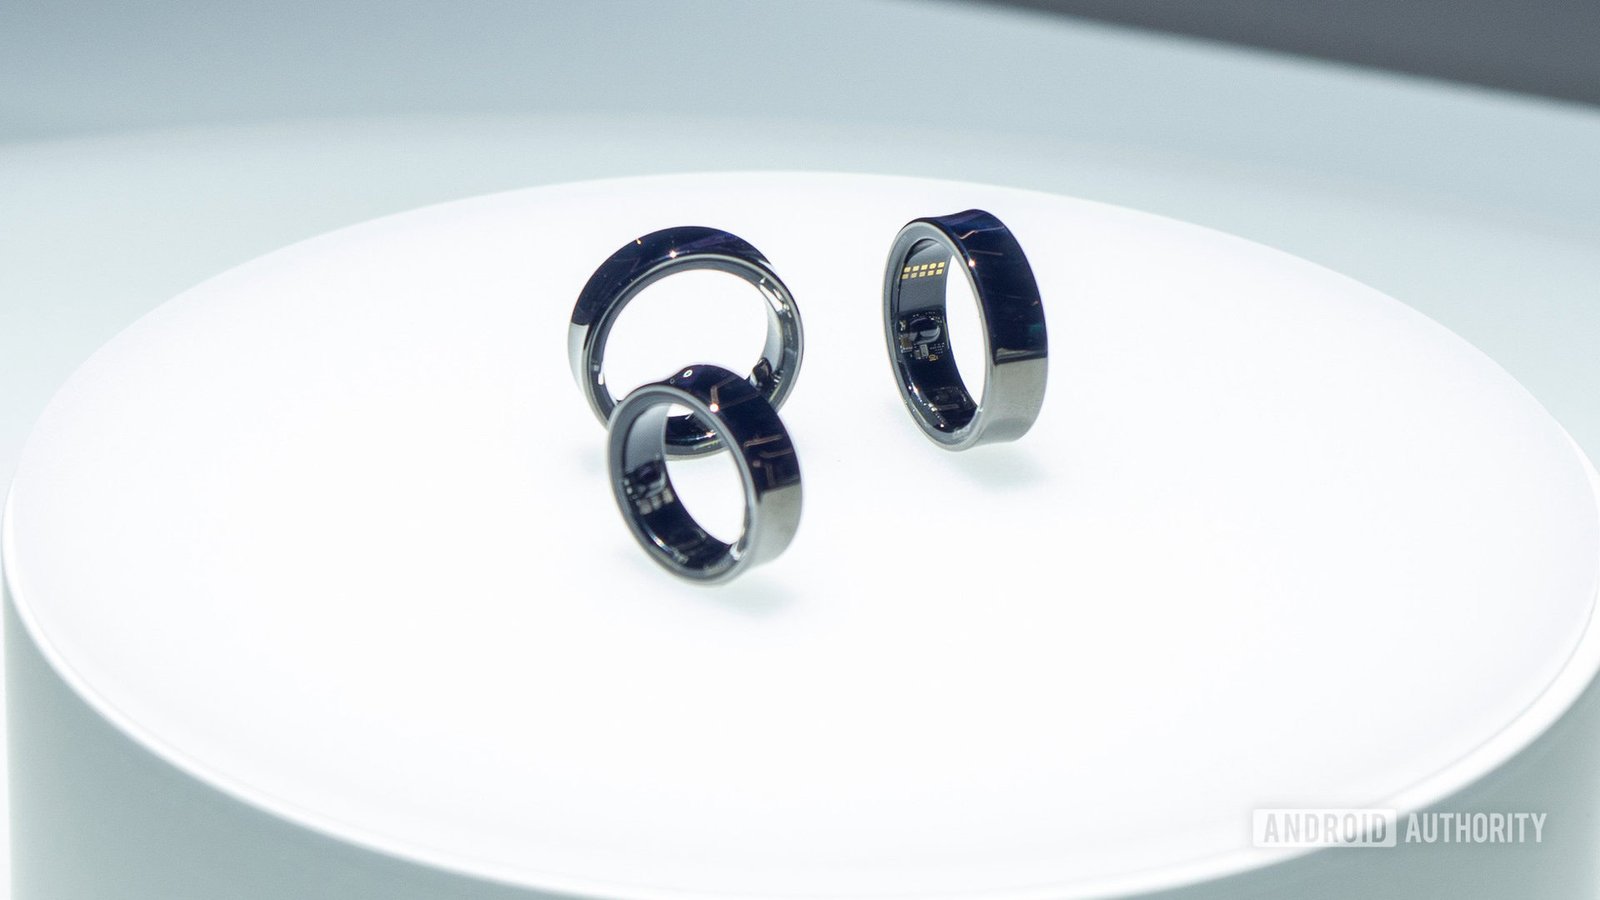 King of the Rings: Samsung sues Oura ahead of Galaxy Ring debut